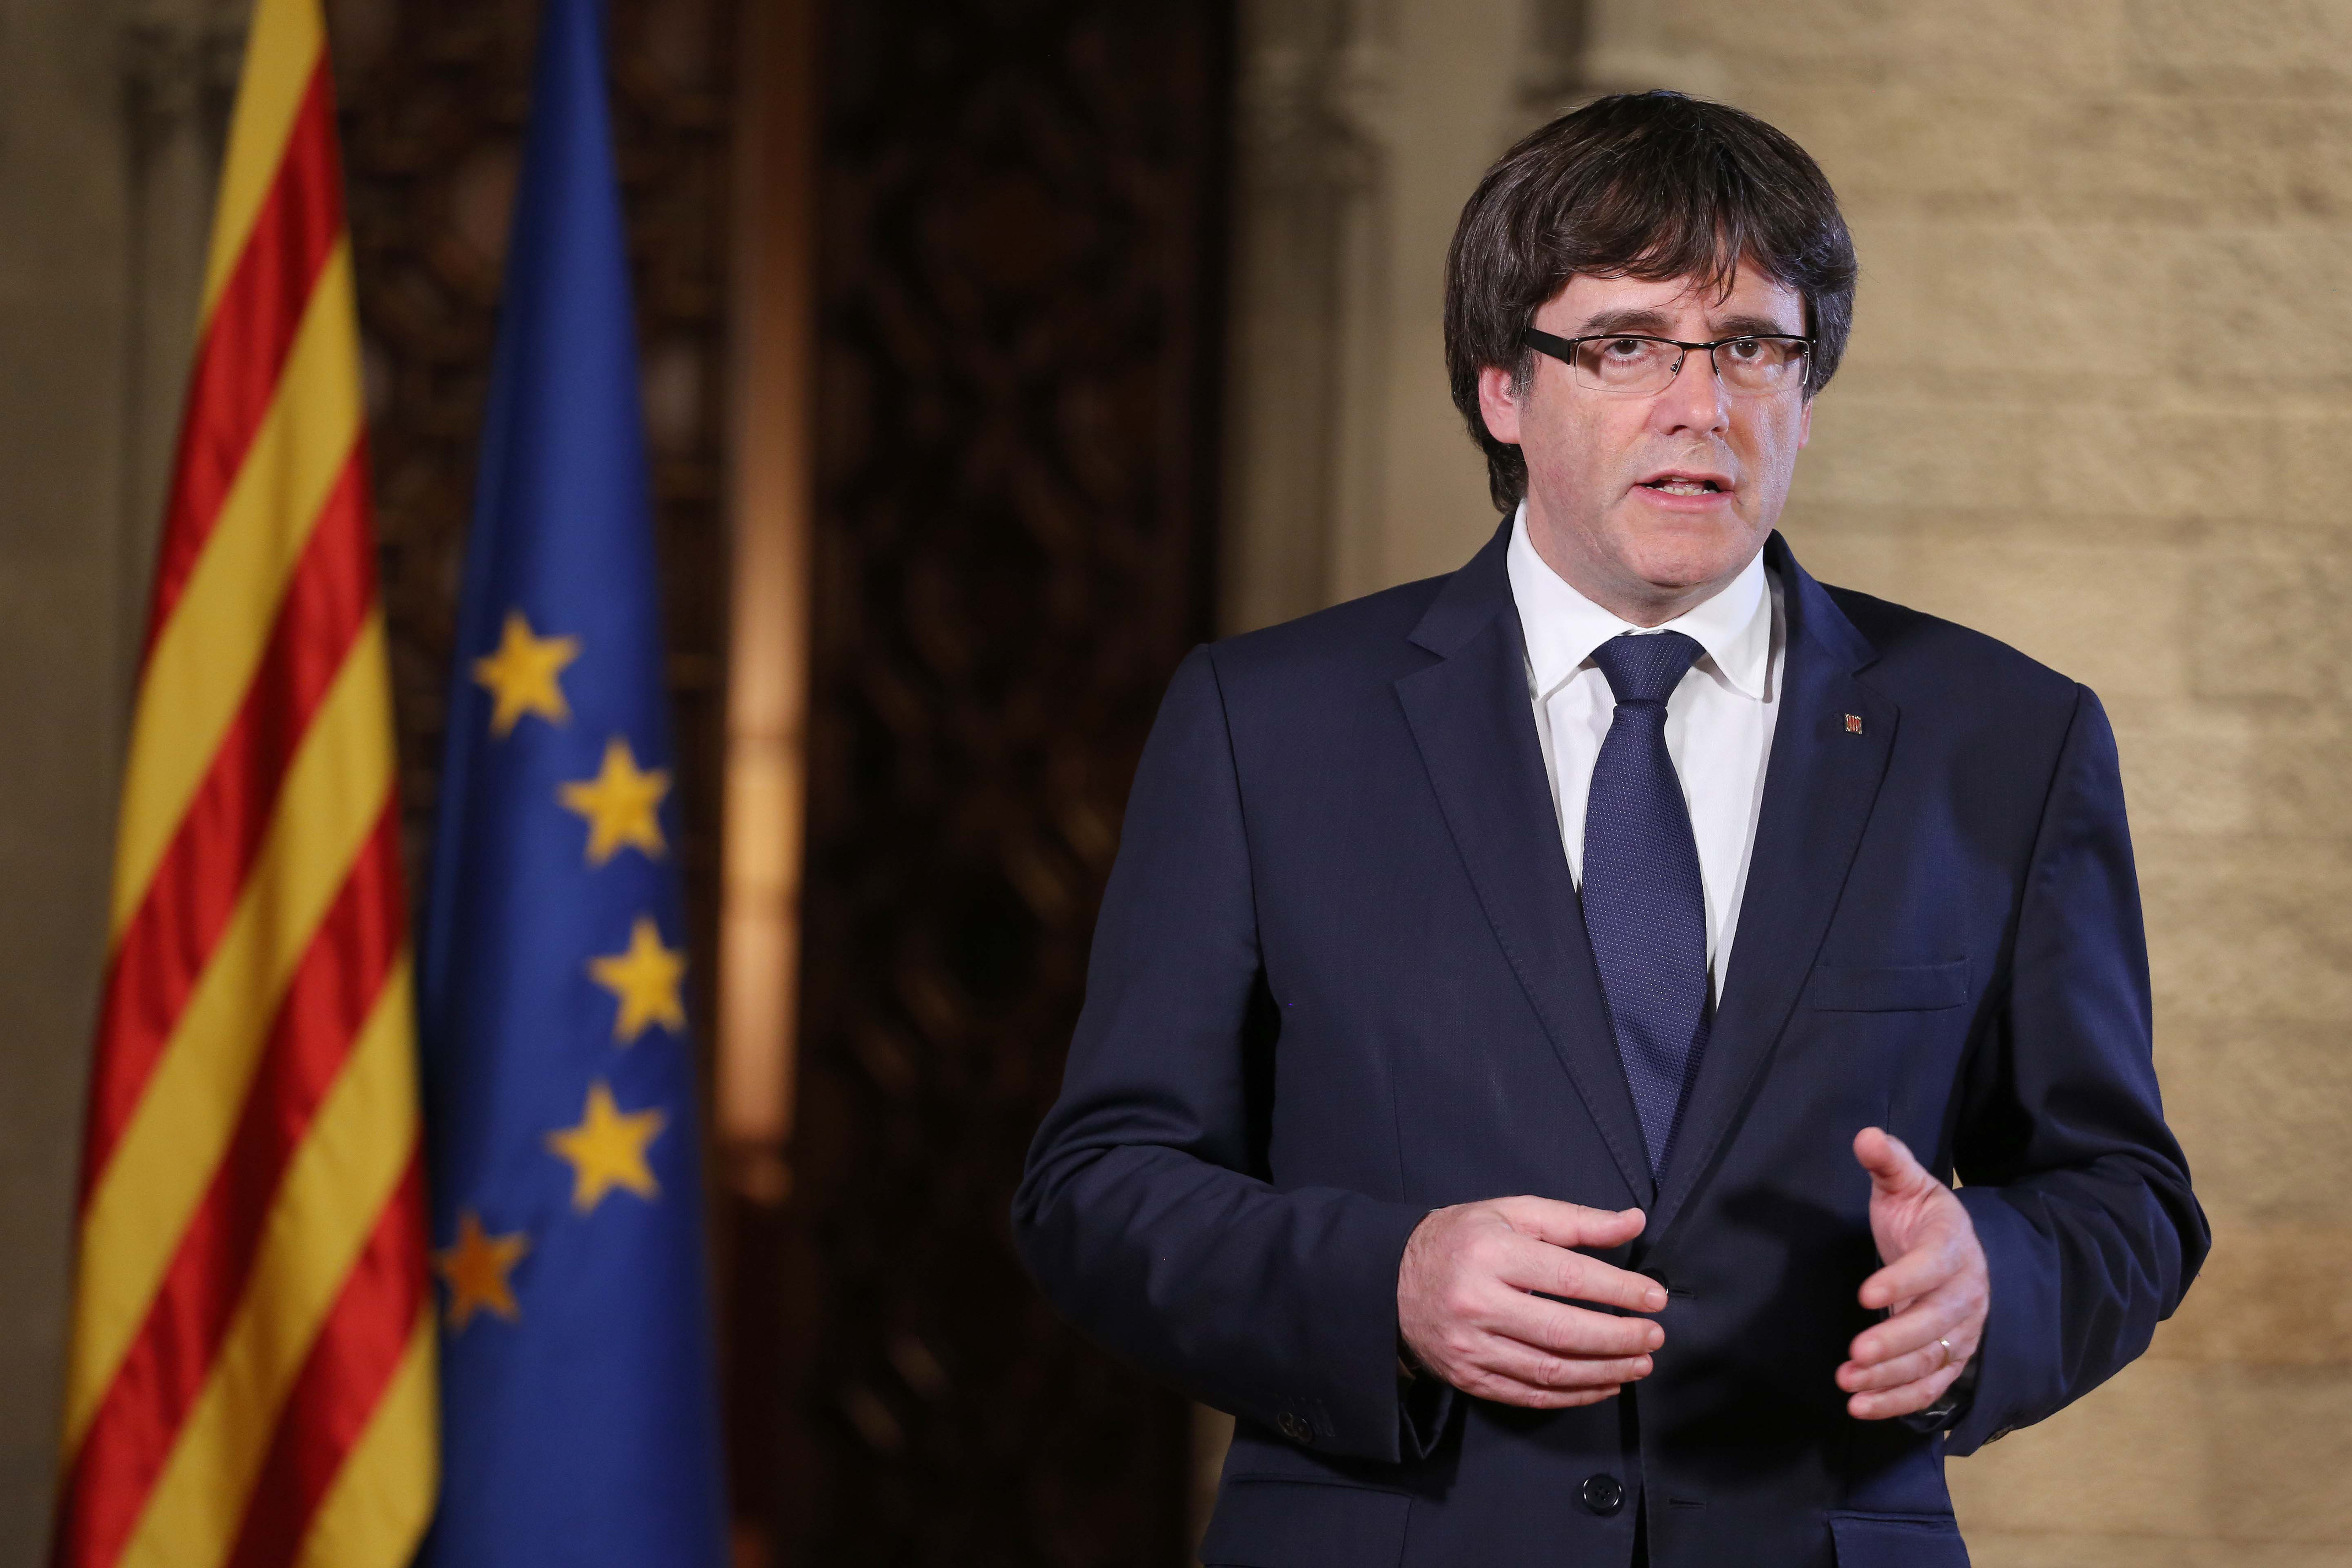 Catalan president Carles Puigdemont in his speech on October 21 following Mariano Rajoy's announcement that Article 155 will be activated to seize Catalonia's self-government (by Rubén Moreno)